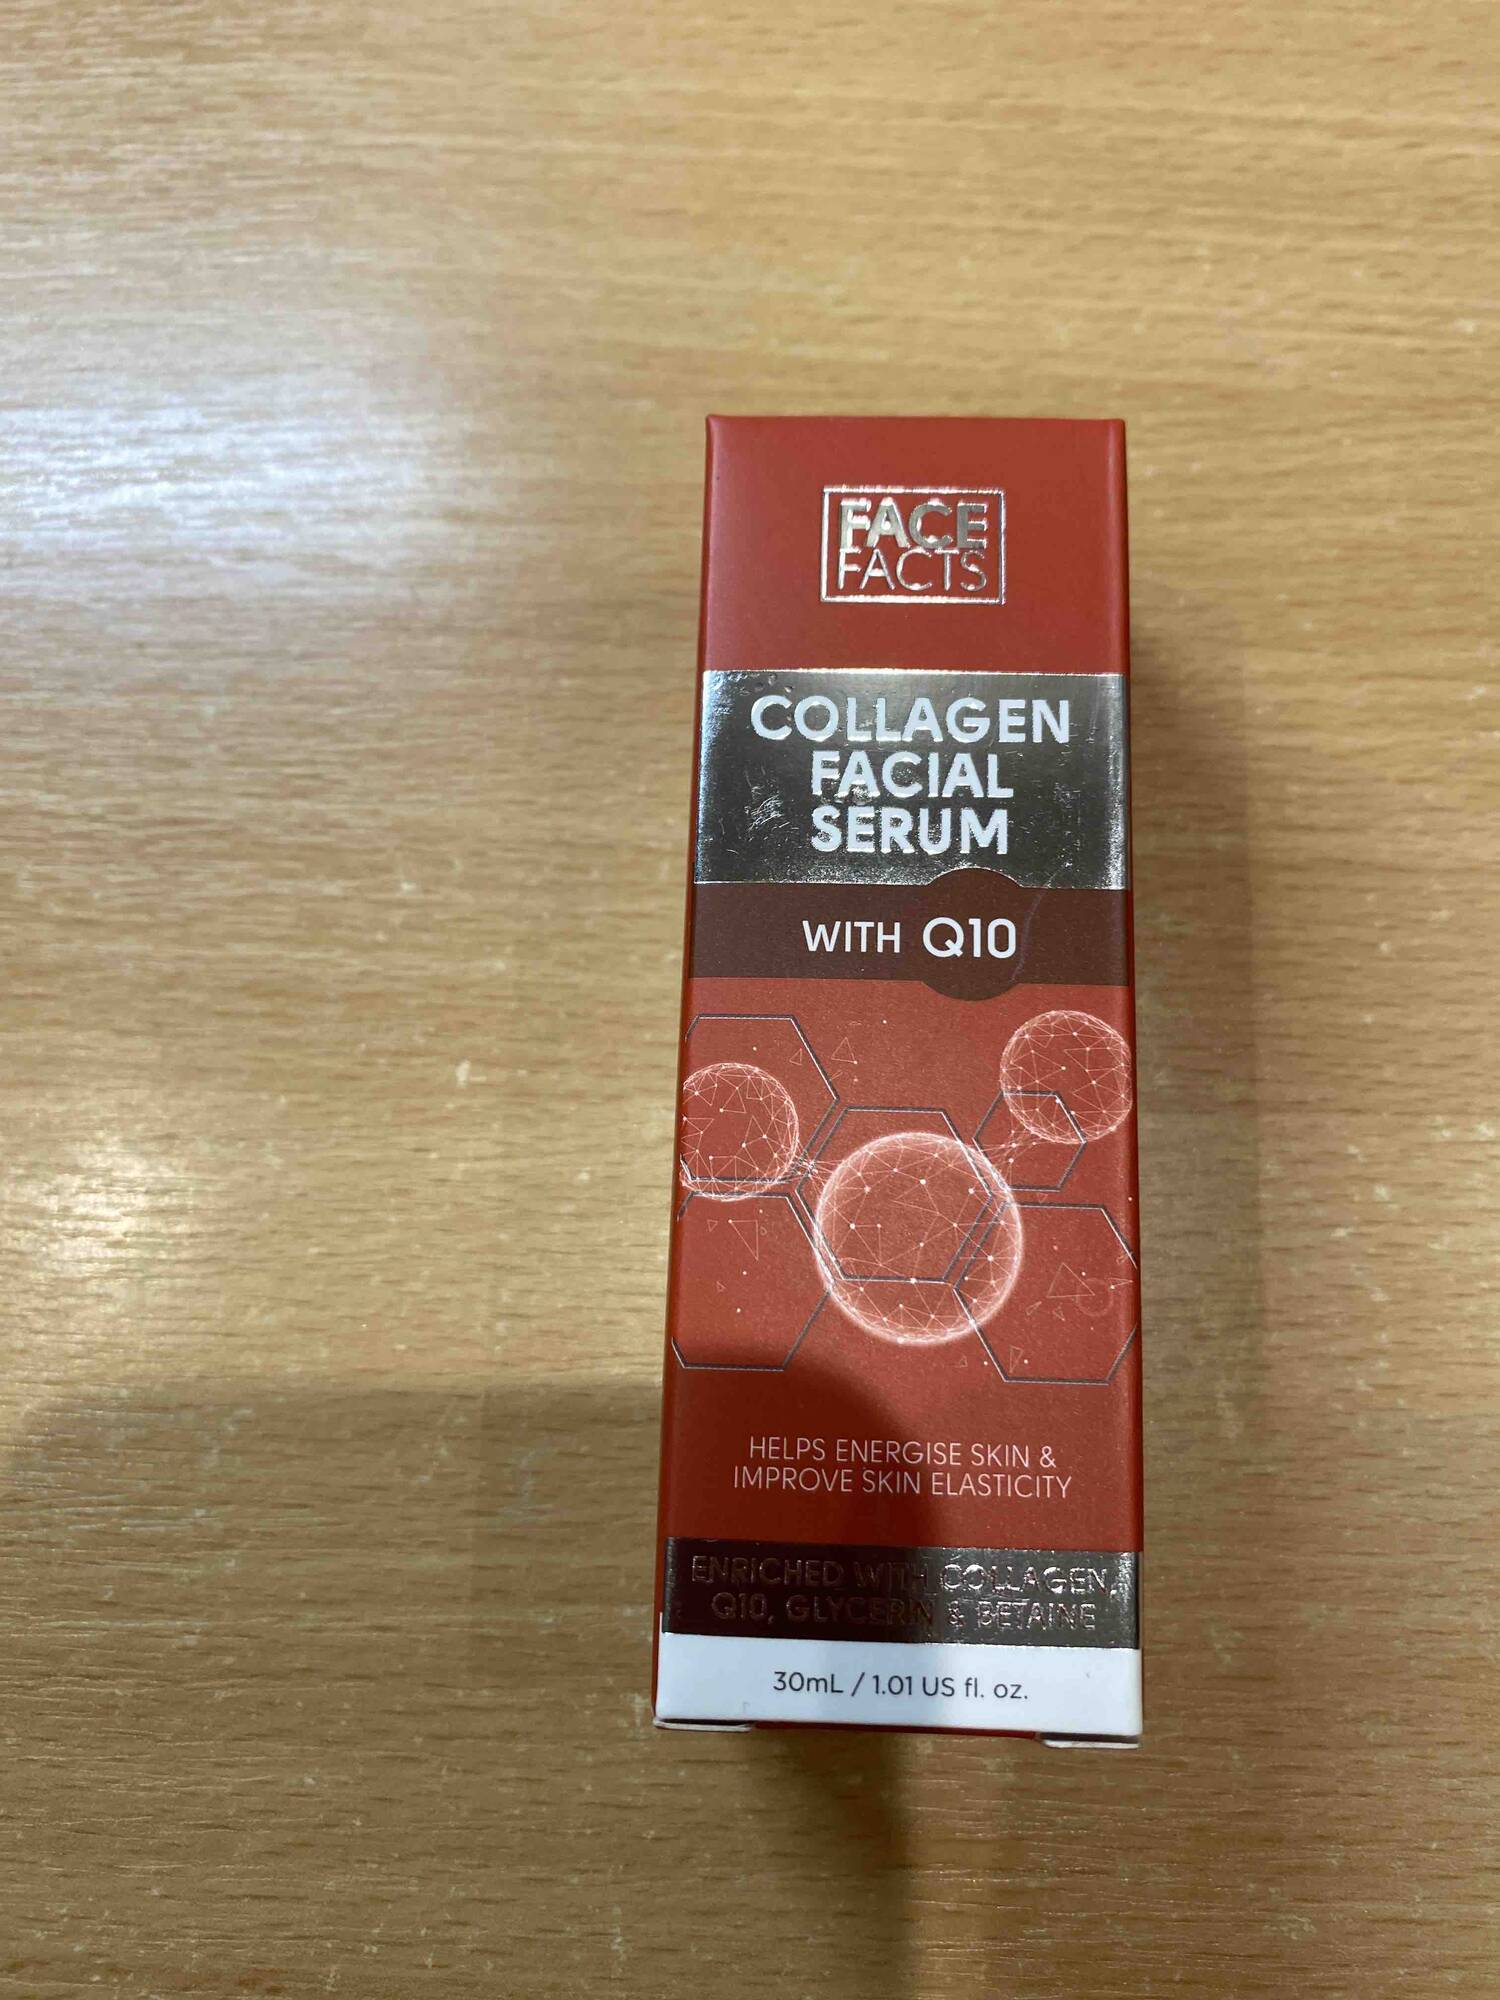 FACE FACTS - Collagen facial serum with Q10